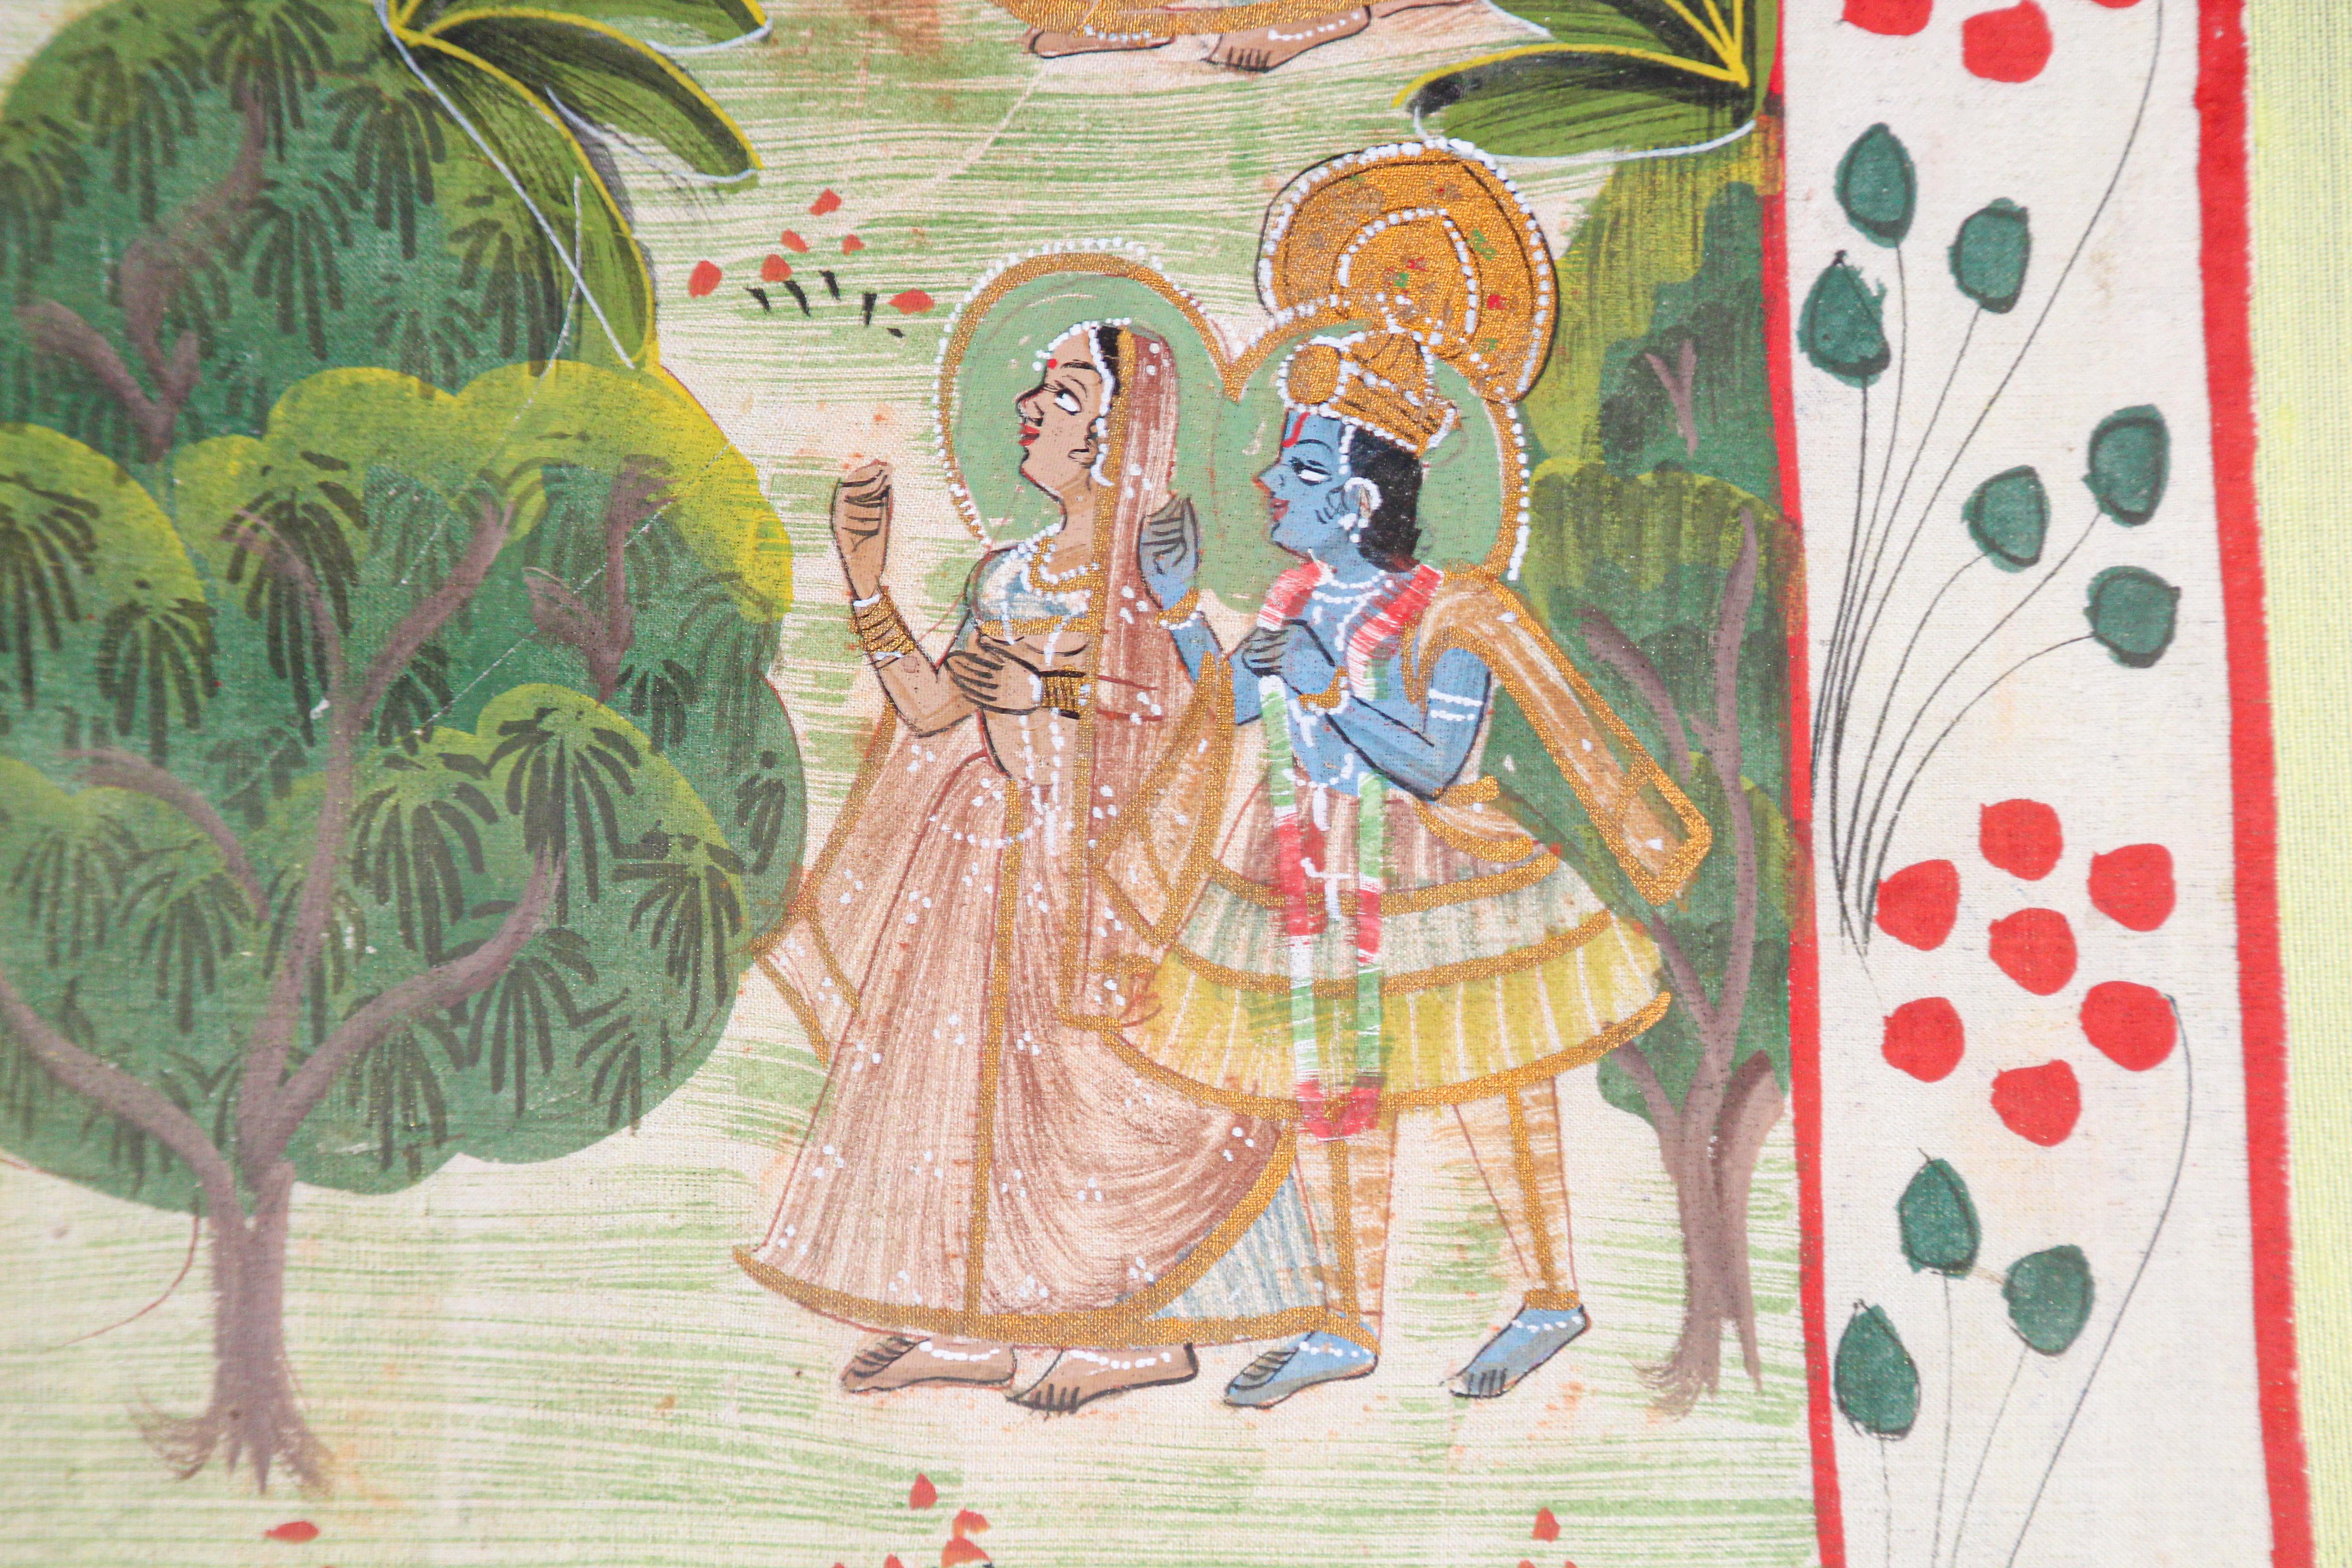 Krishna, Radha, and the Gopis Meet a Young Prince, Picchawai Painting 2